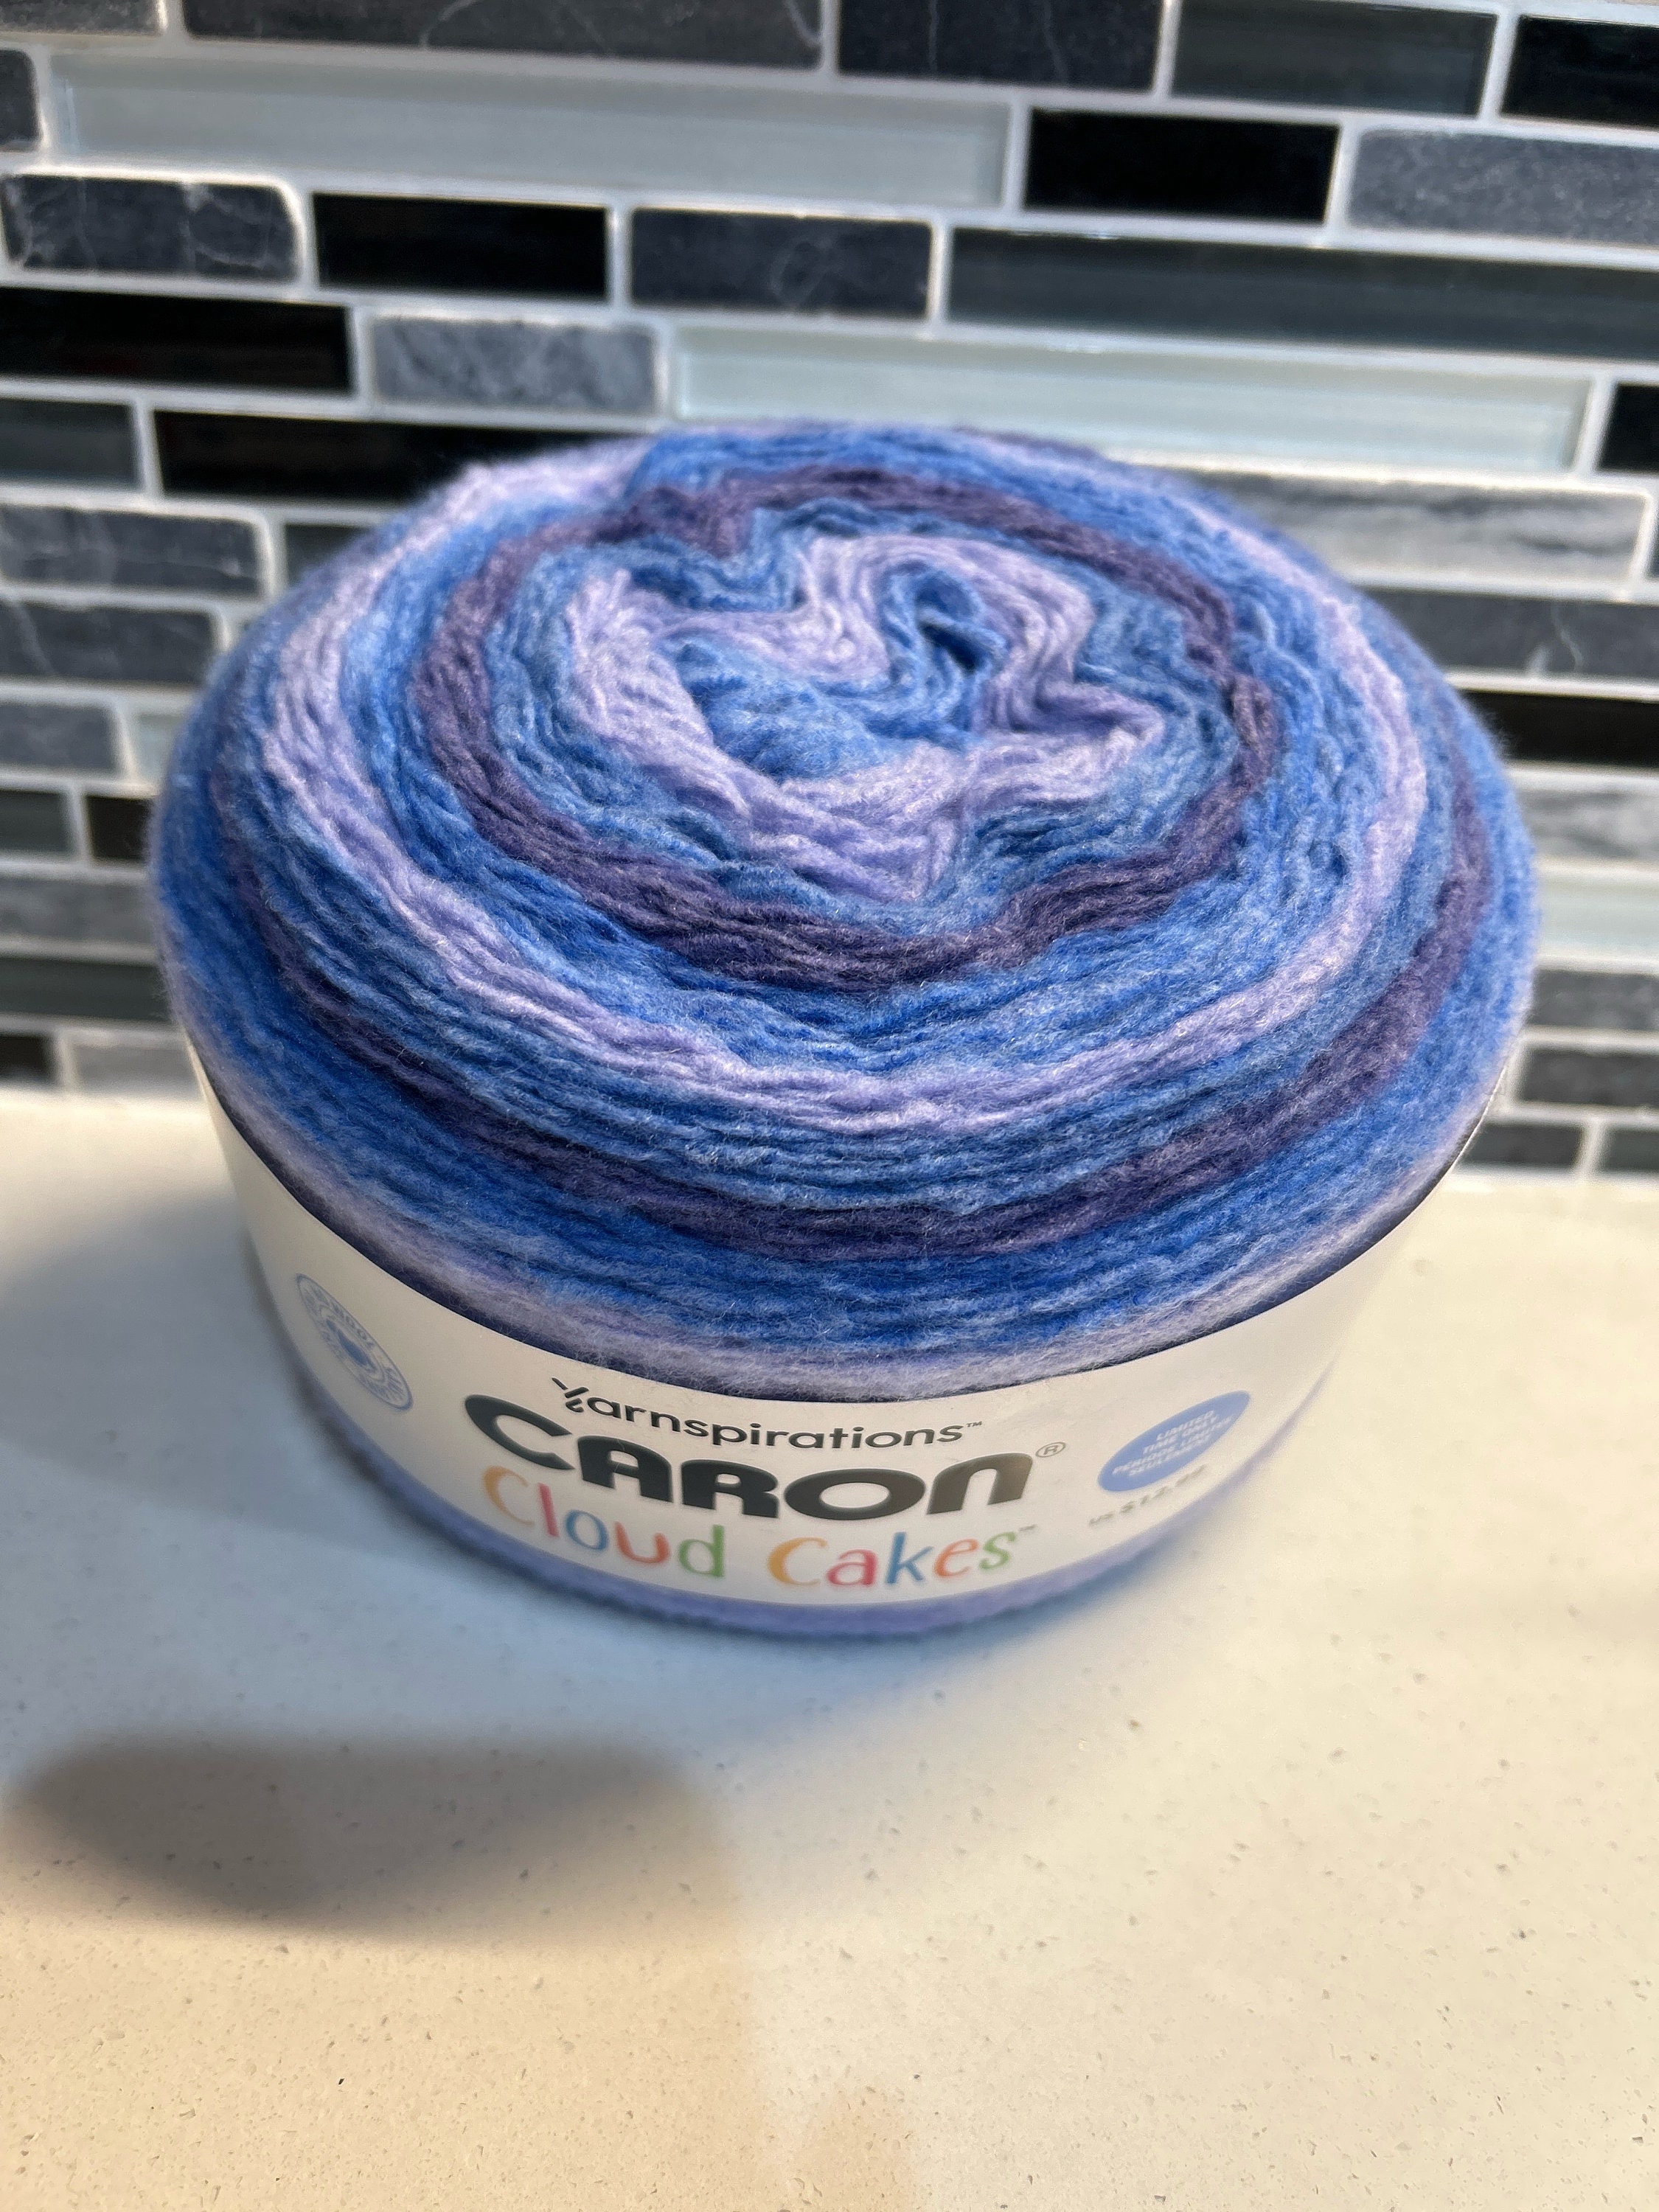 Lot of 3 Caron Cloud Cakes Yarn - DR Trouble